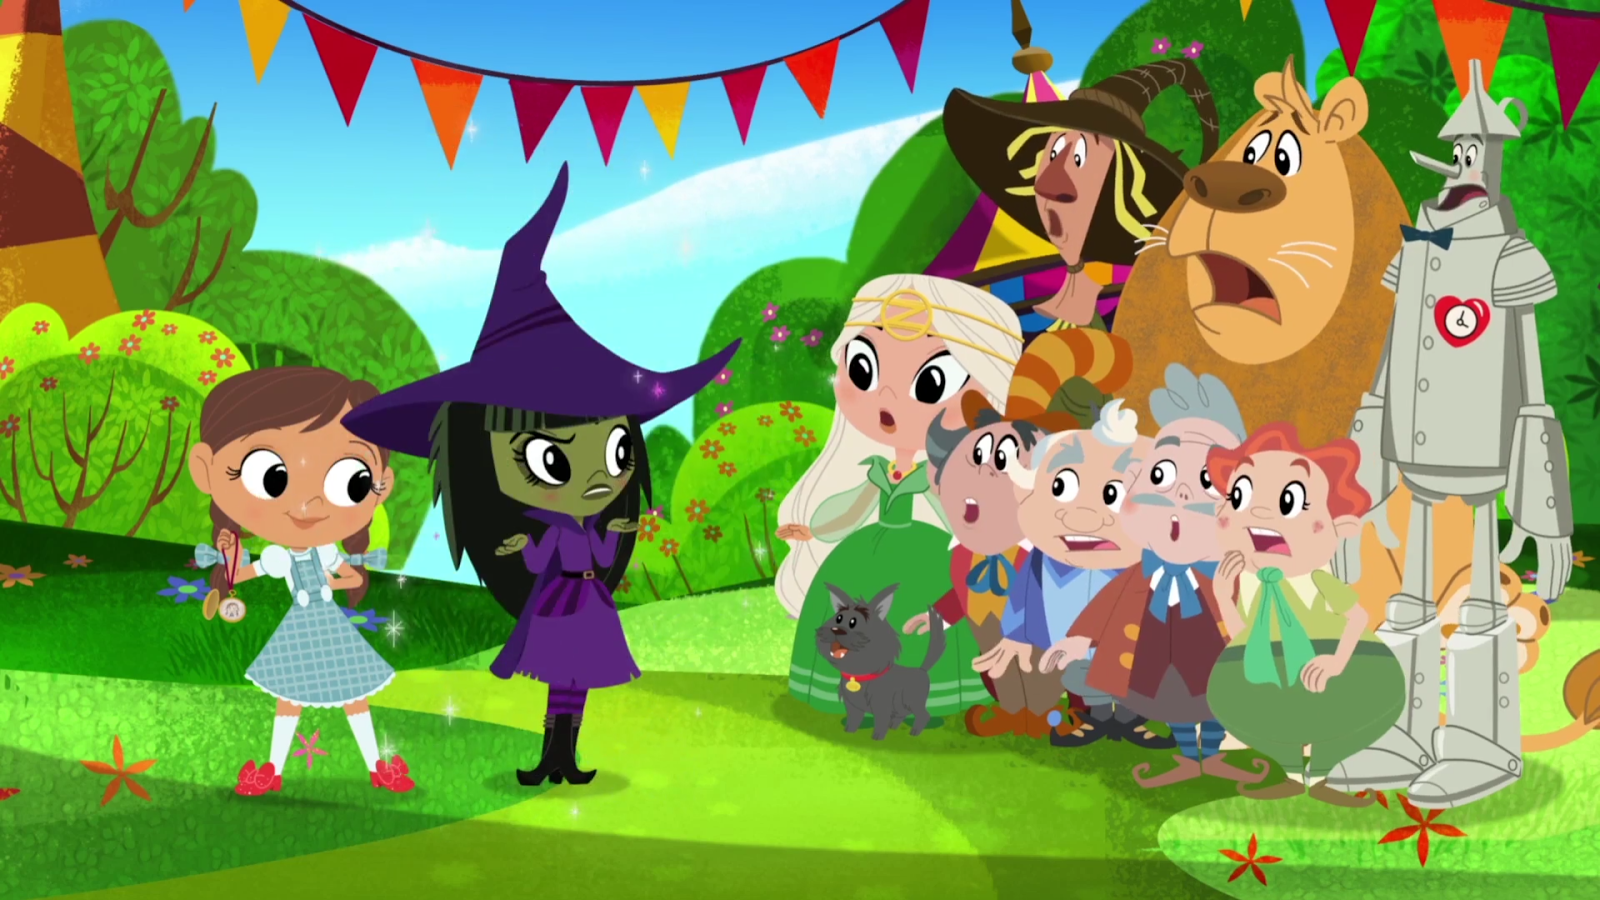 First Look at 'Dorothy and the Wizard of Oz' Animated Series.